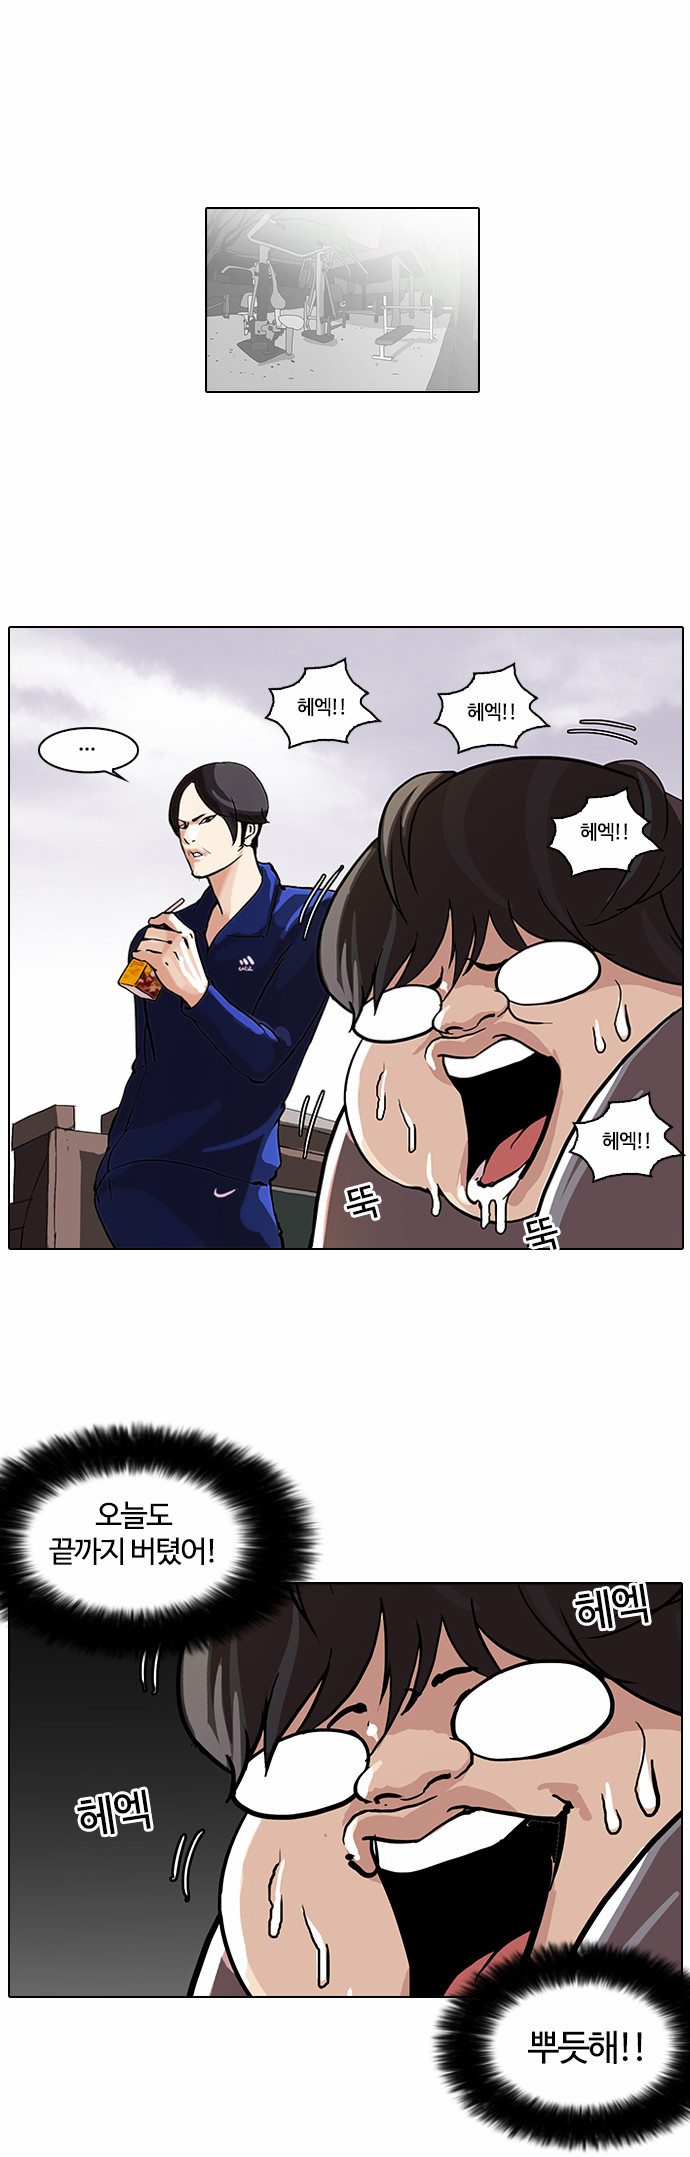 Lookism - Chapter 112 - Page 1